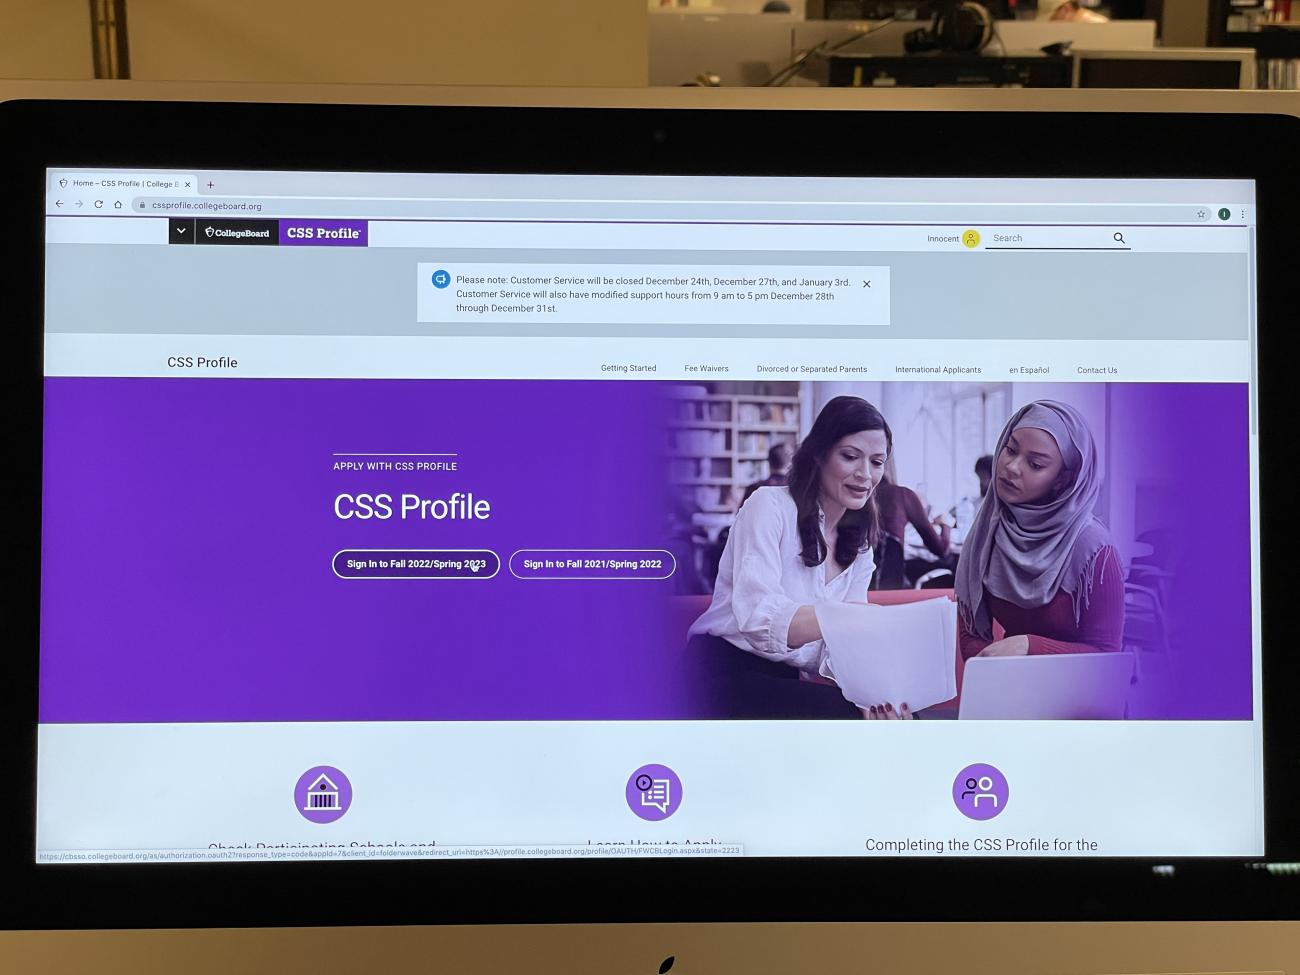 A photo showing the College Scholarship Service (CSS) Profile home page.